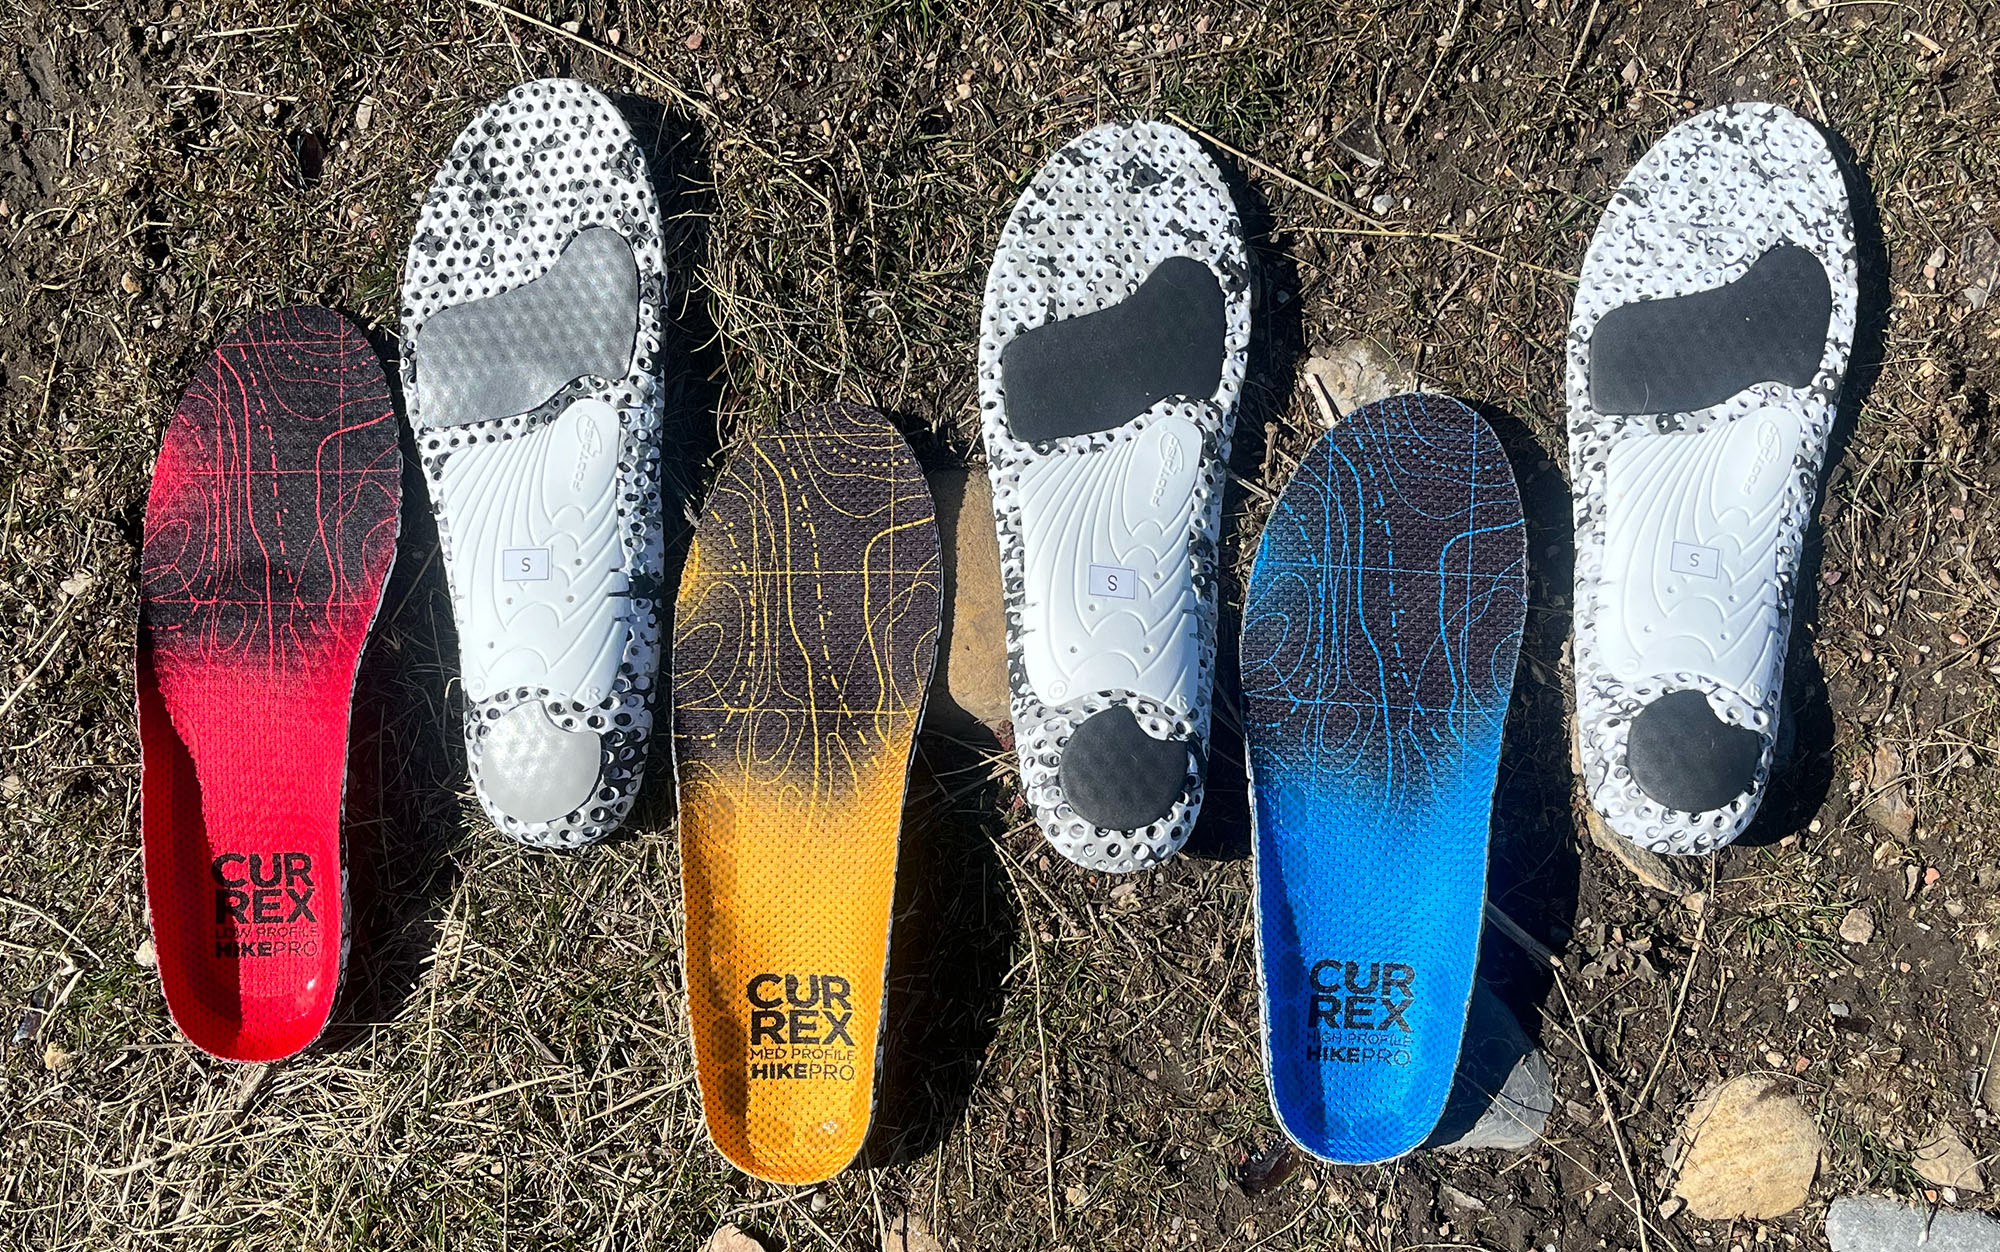 Currex offers their insoles in the traditional arch height categories: low, medium, and high.